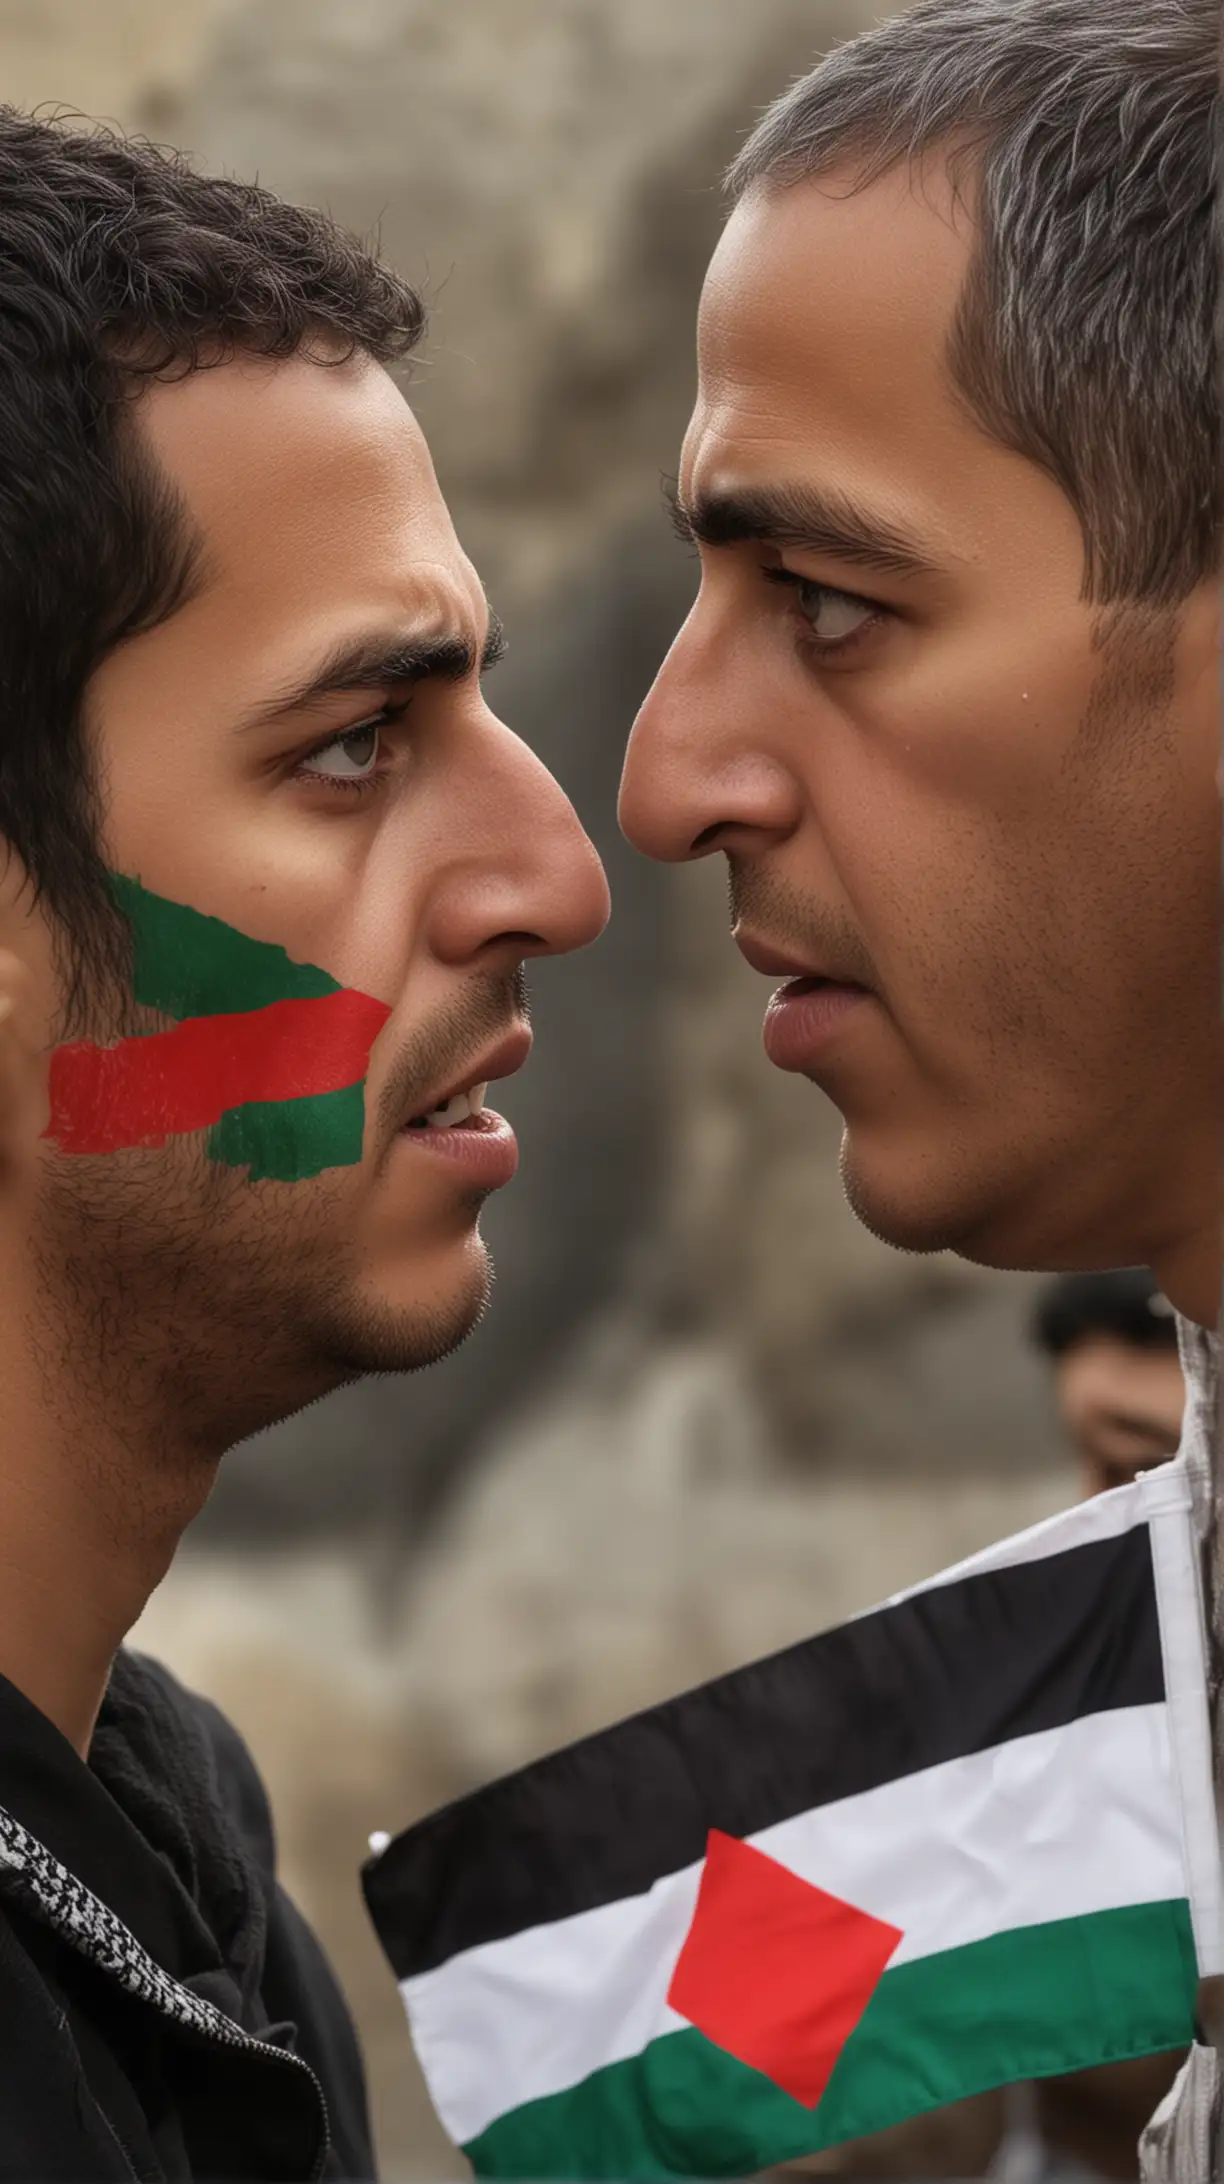 Palestinian and Israeli Heads Anger Exchanged in Flag StareDown